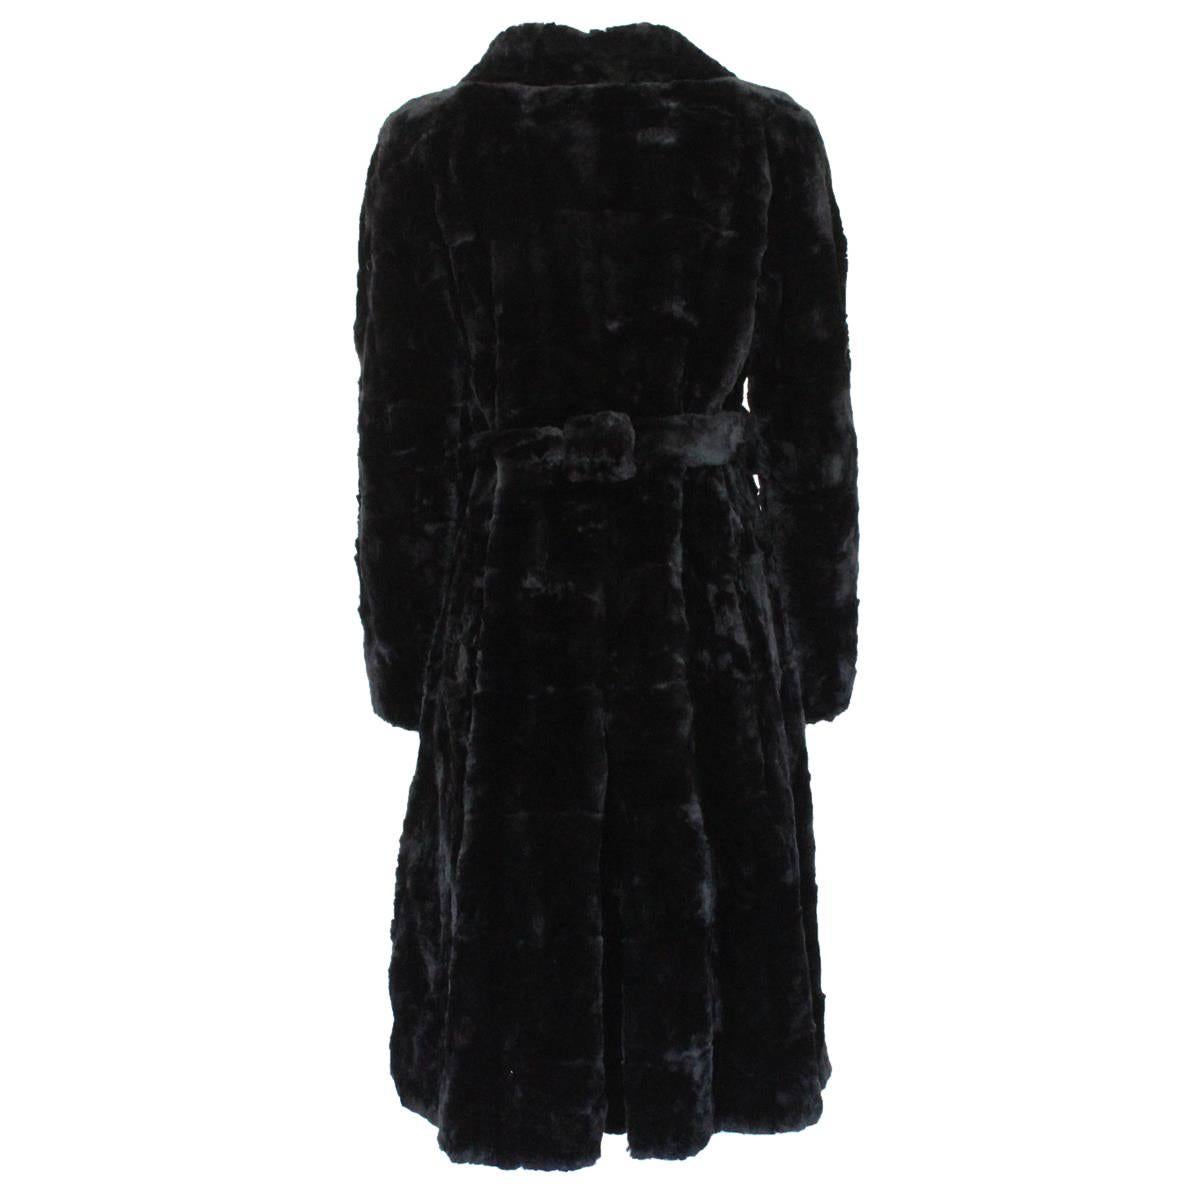 Beautiful Marni fur coat !
Long coat
Lapin fur
Black color
Button closure
2 Pockets
With belt
Total length cm 100 (39.3 inches)
Made in Italy
Worldwide express shipping included in the price !